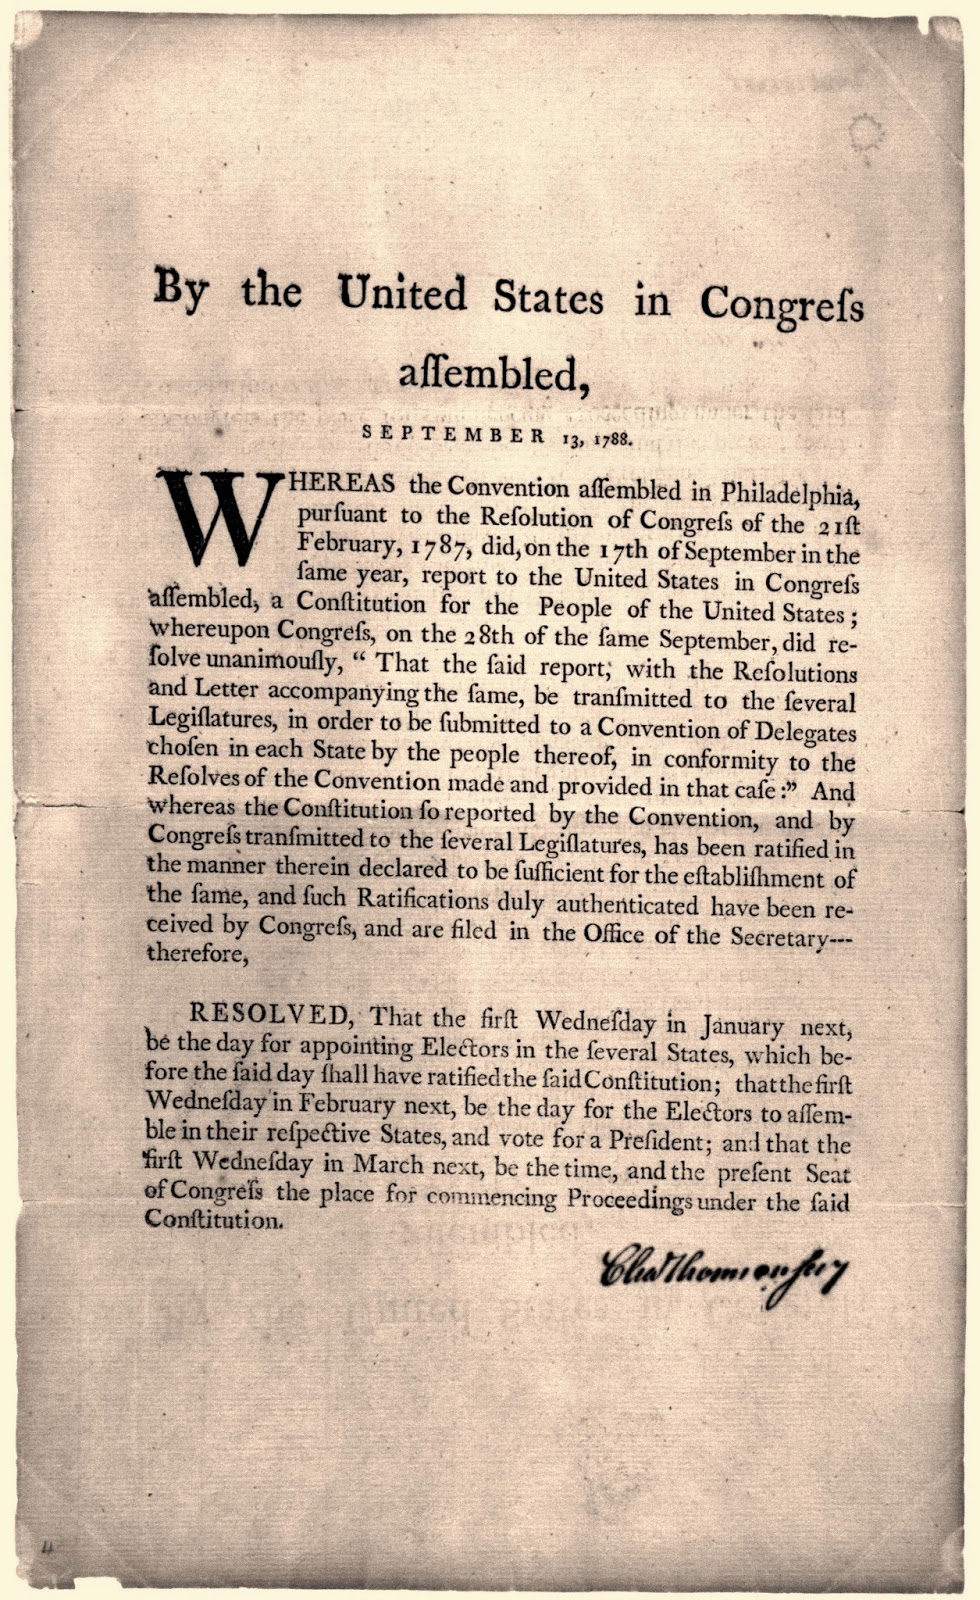 The Report on the Resolution to Enact The US Constitution